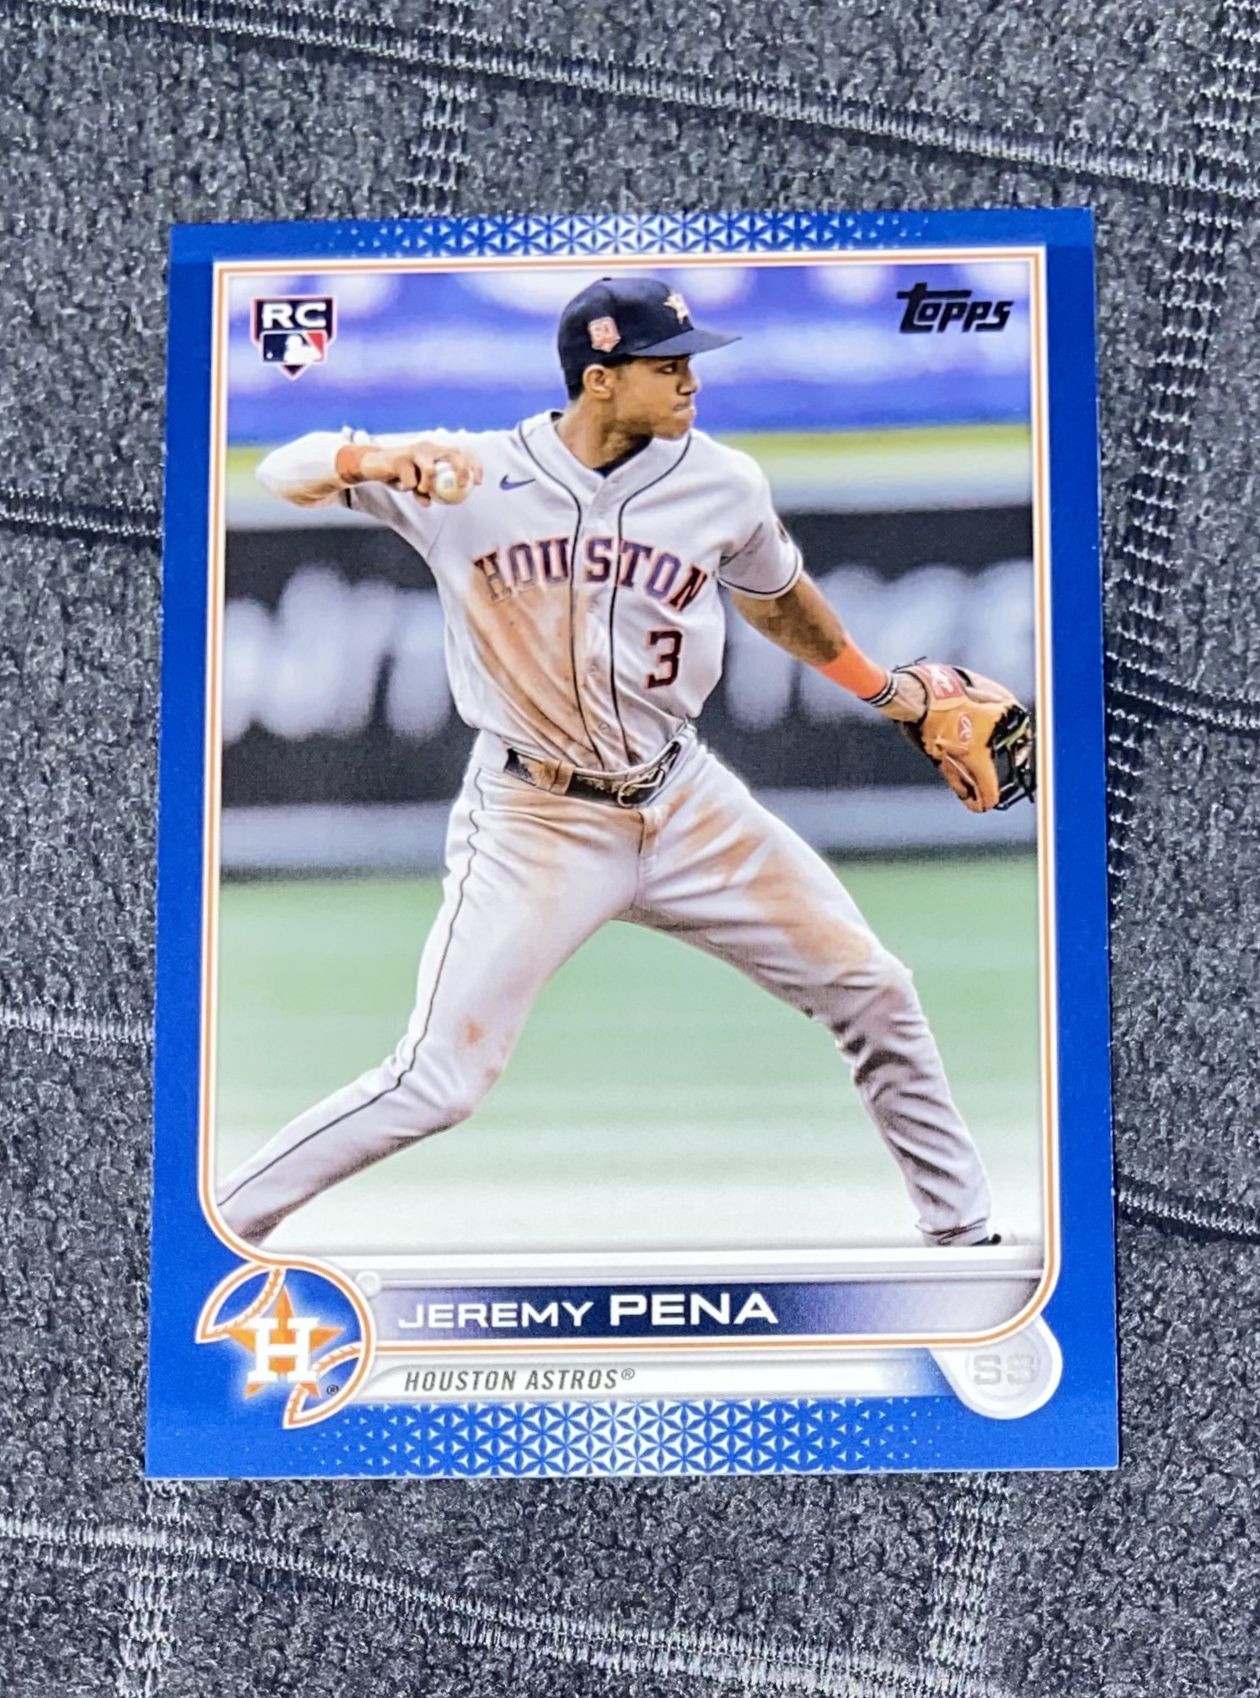 Houston Astros Jeremy Pena Rookie Card for Sale in Houston, TX